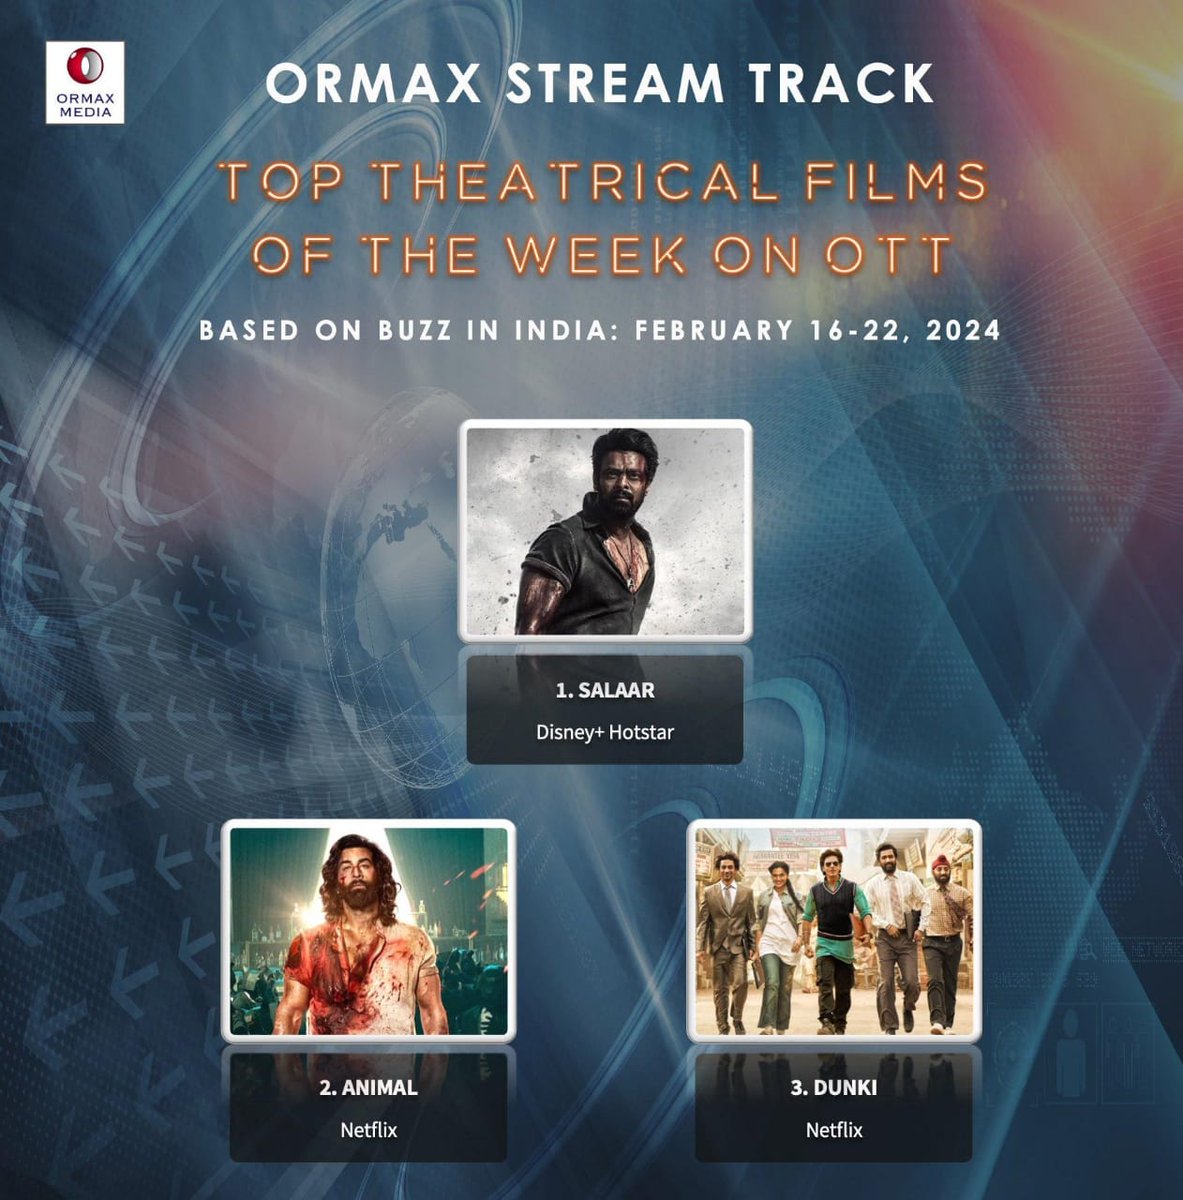 Ormax Stream Track: Top theatrical films on OTT in India, including upcoming films, based on Buzz (Feb 16-22) #OrmaxStreamTrack #OTT